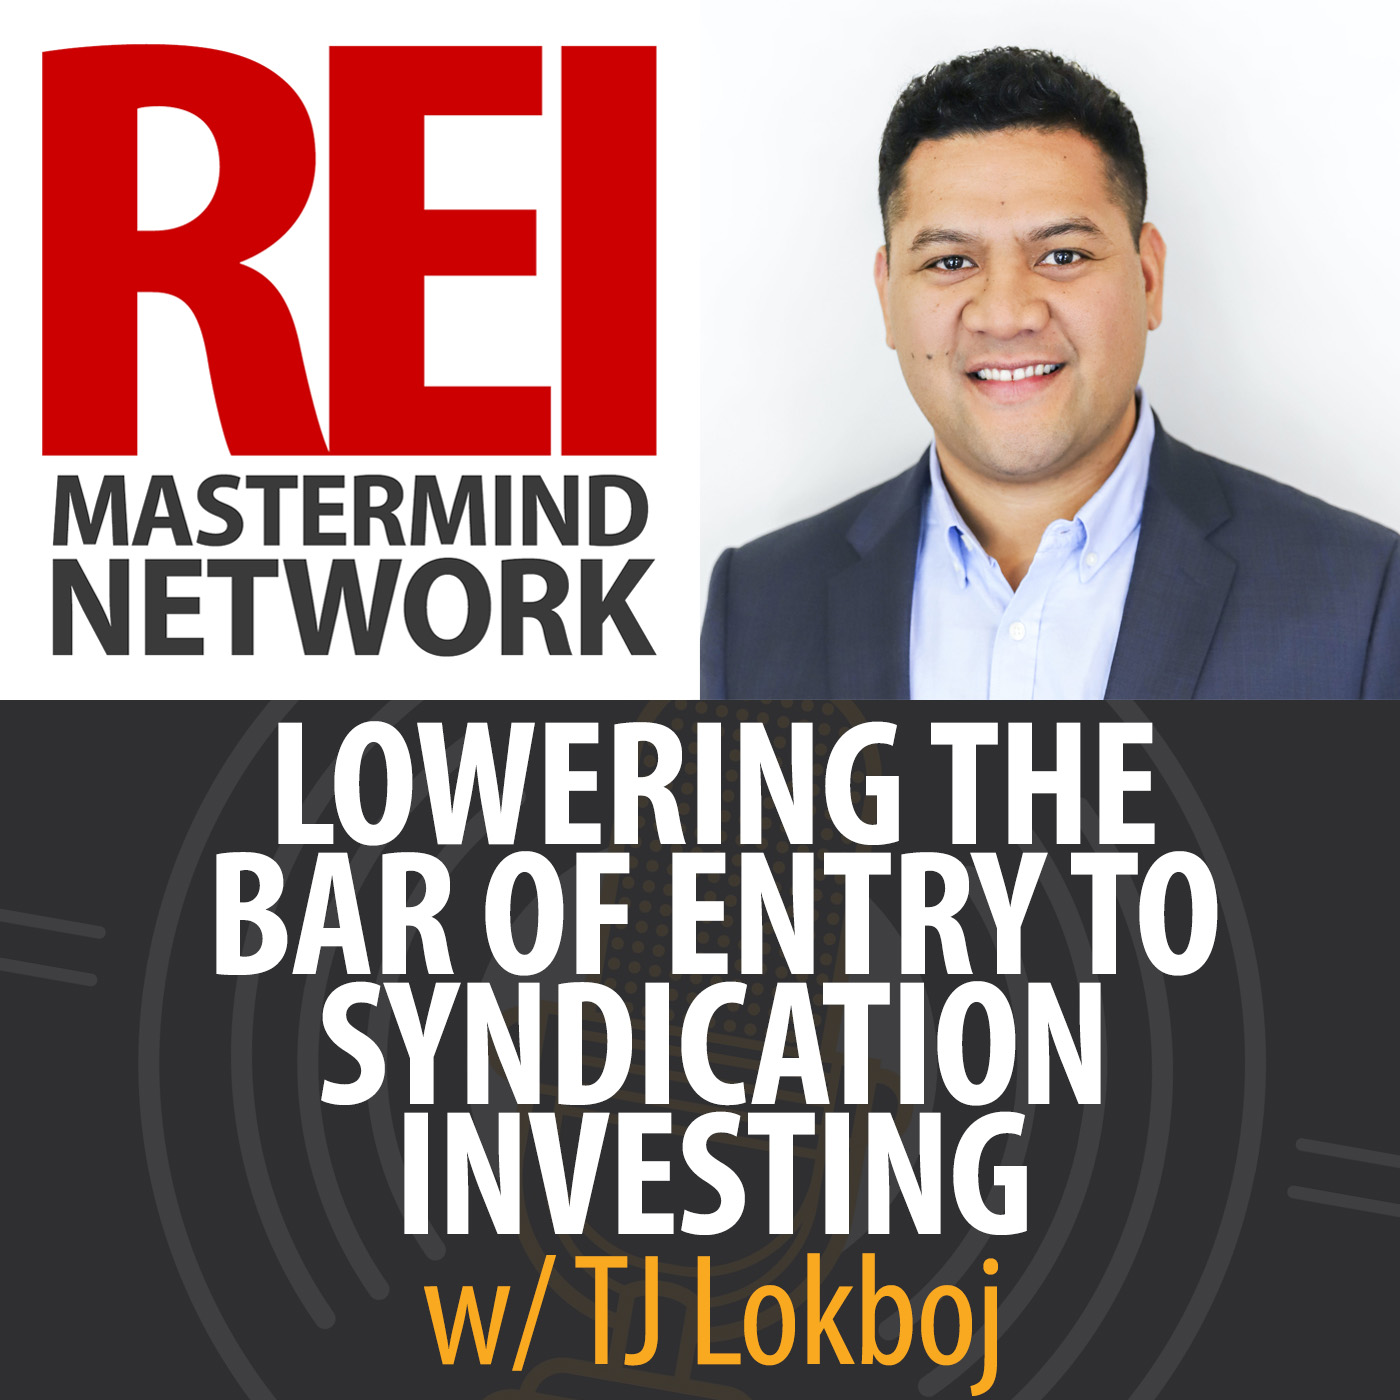 Lowering the Bar of Entry to Syndication Investing with TJ Lokboj Image